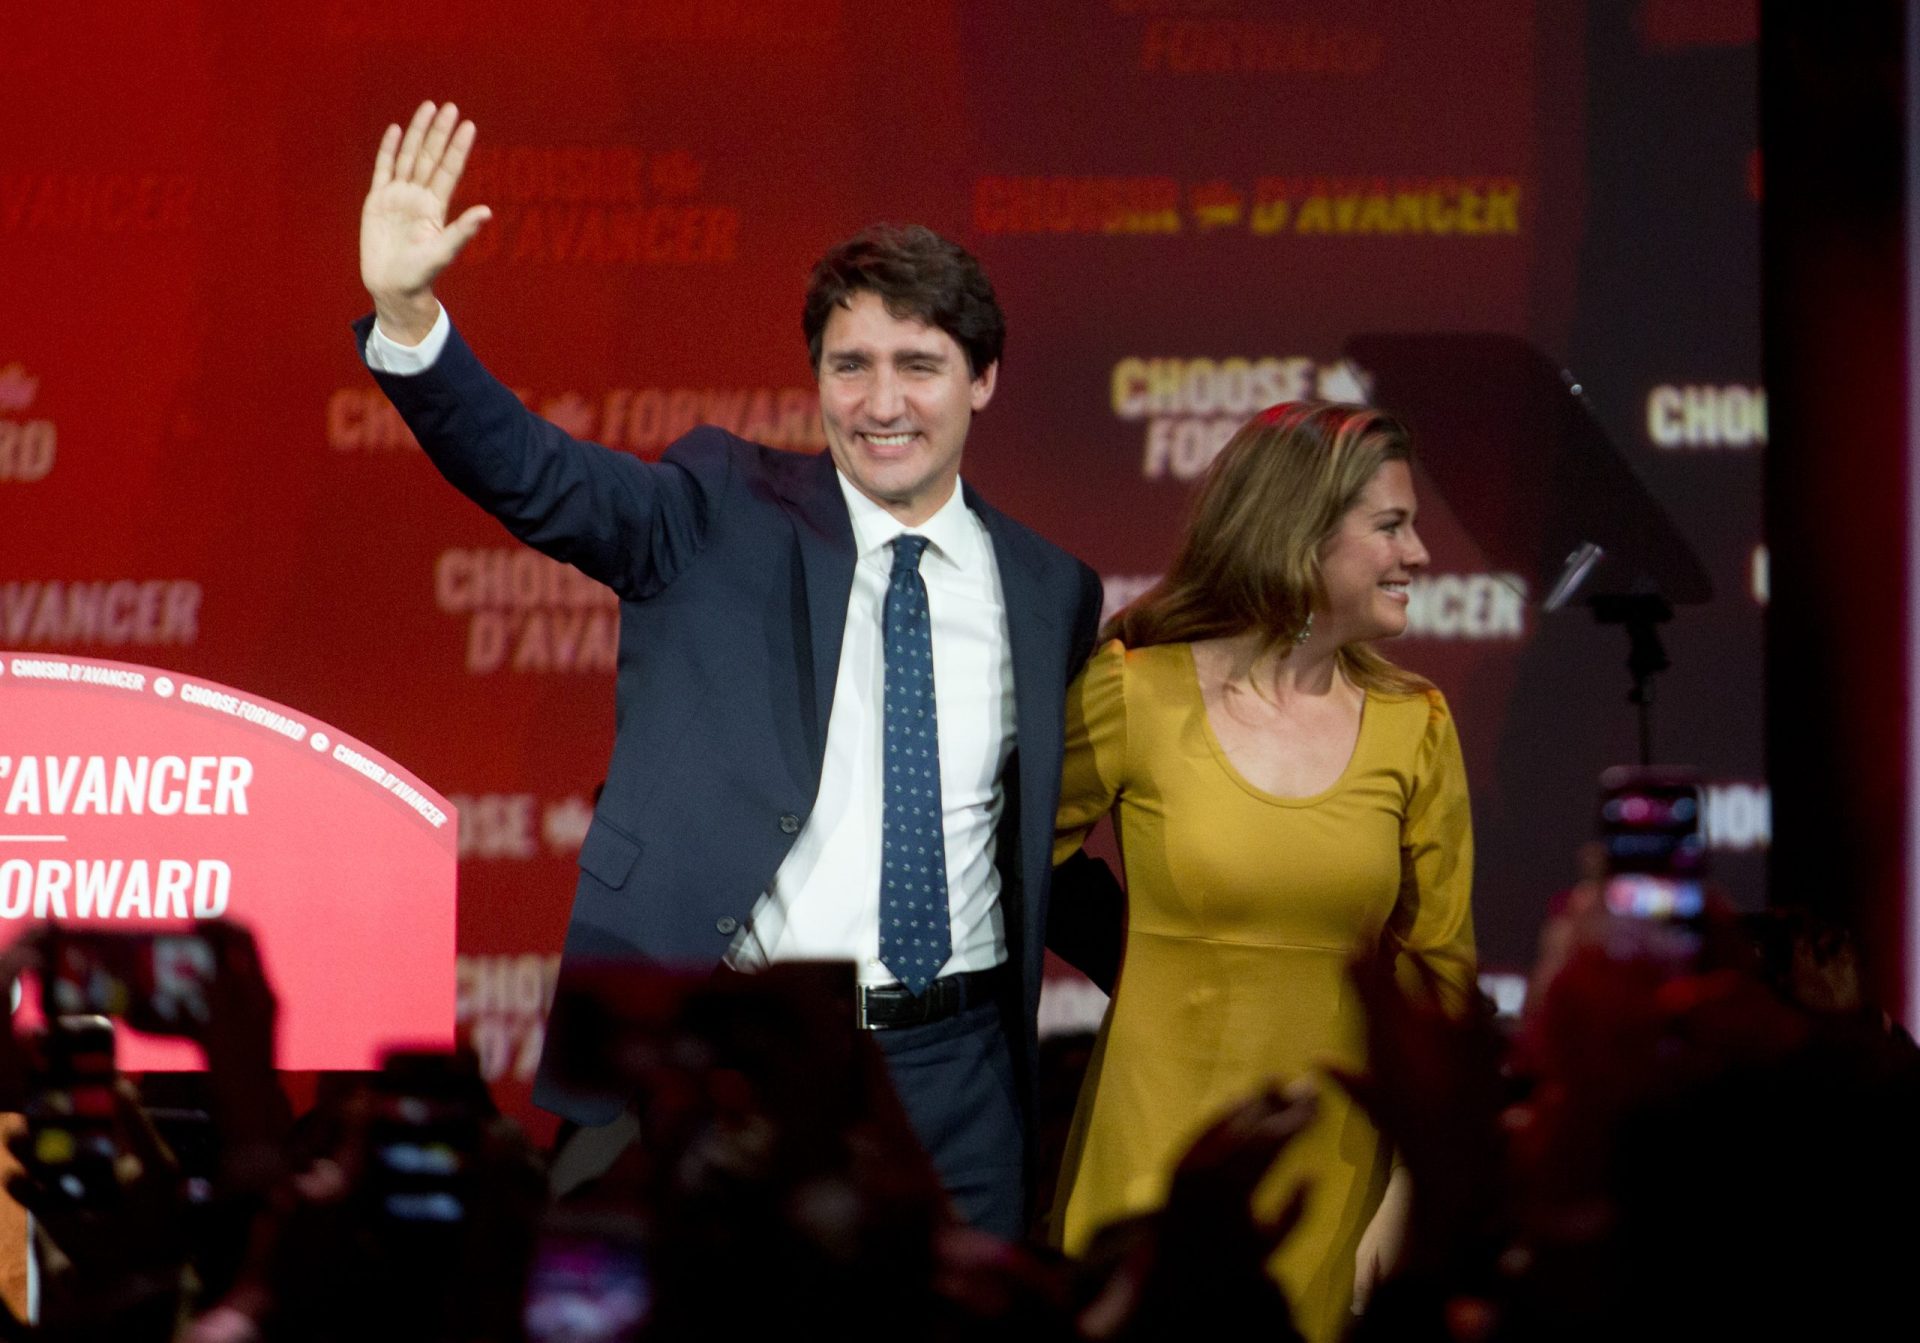 Prime Minister Justin Trudeau addresses supporters in attendance at an election day rally after securing a second term minority government, in Montreal on Oct. 21, 2019.